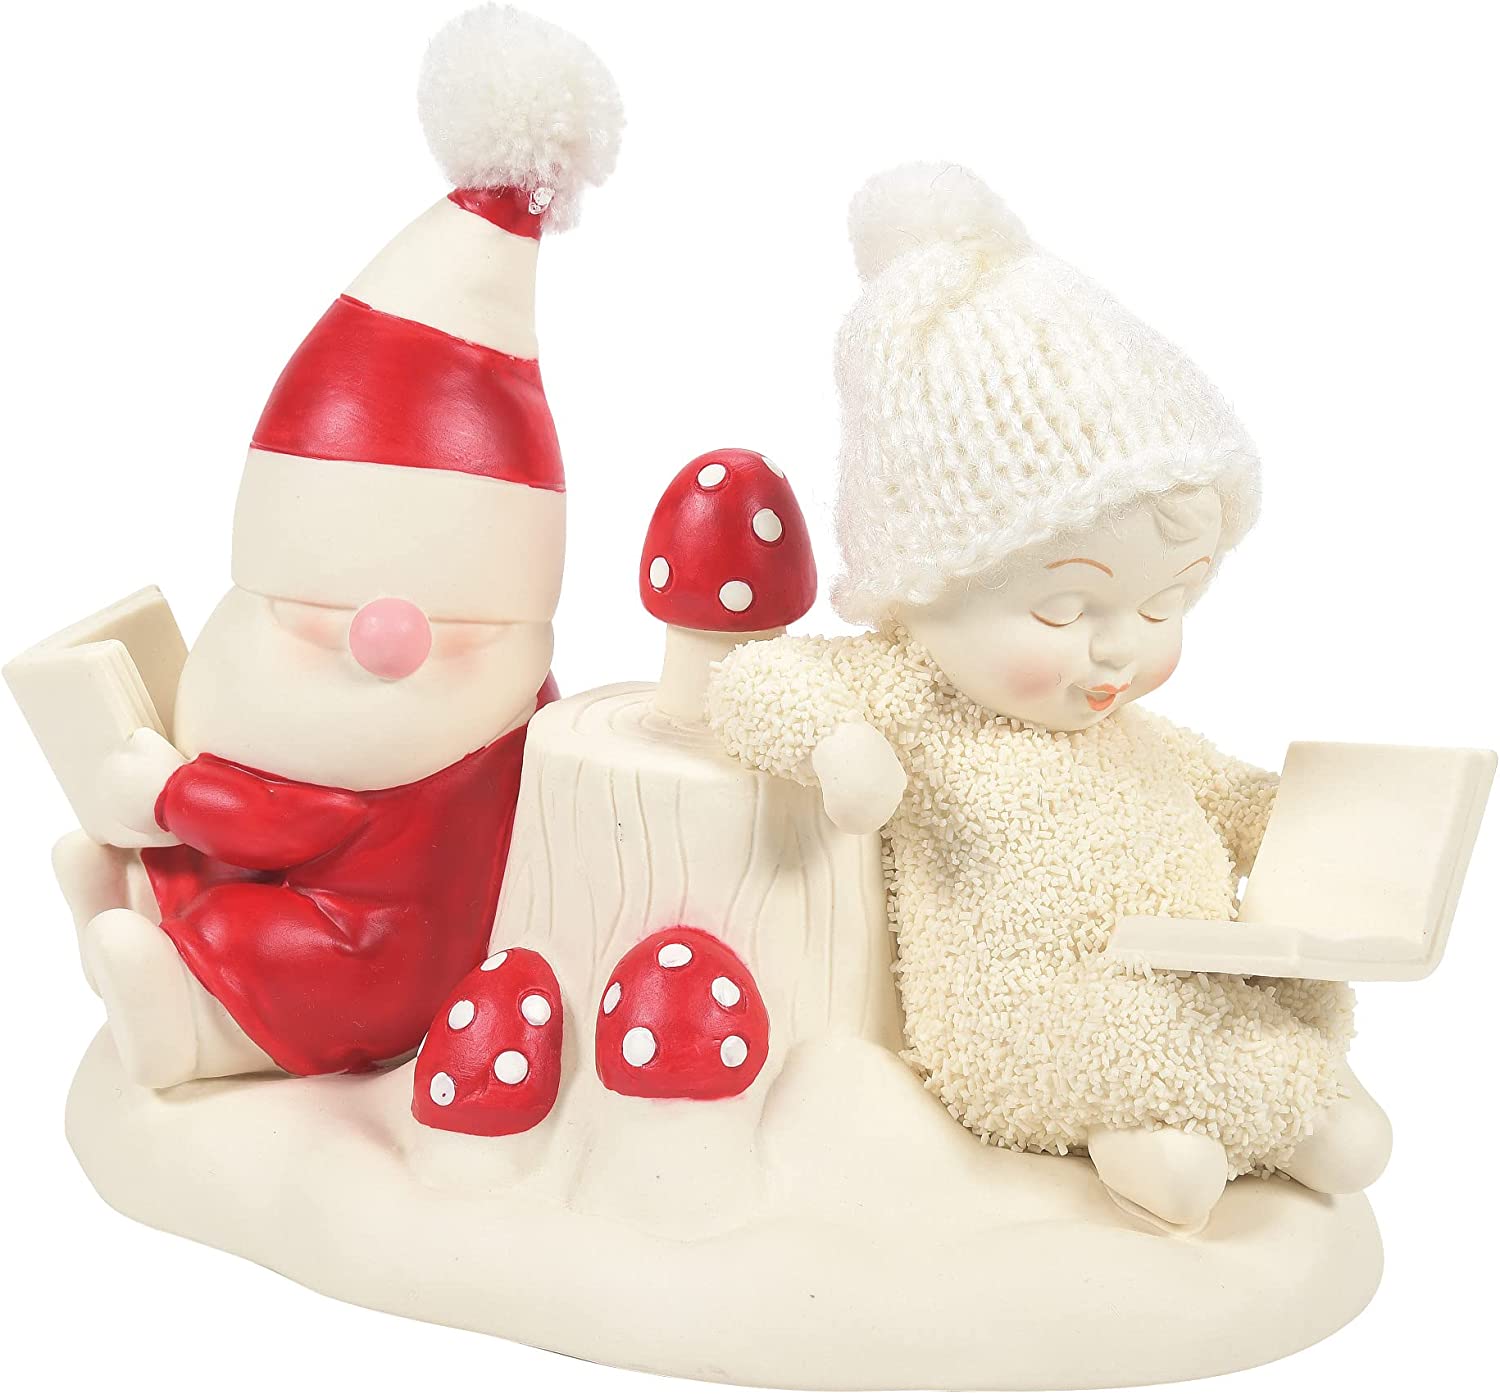 Department 56 Snowbabies Christmas Memories Once Upon a Gnome Figurine